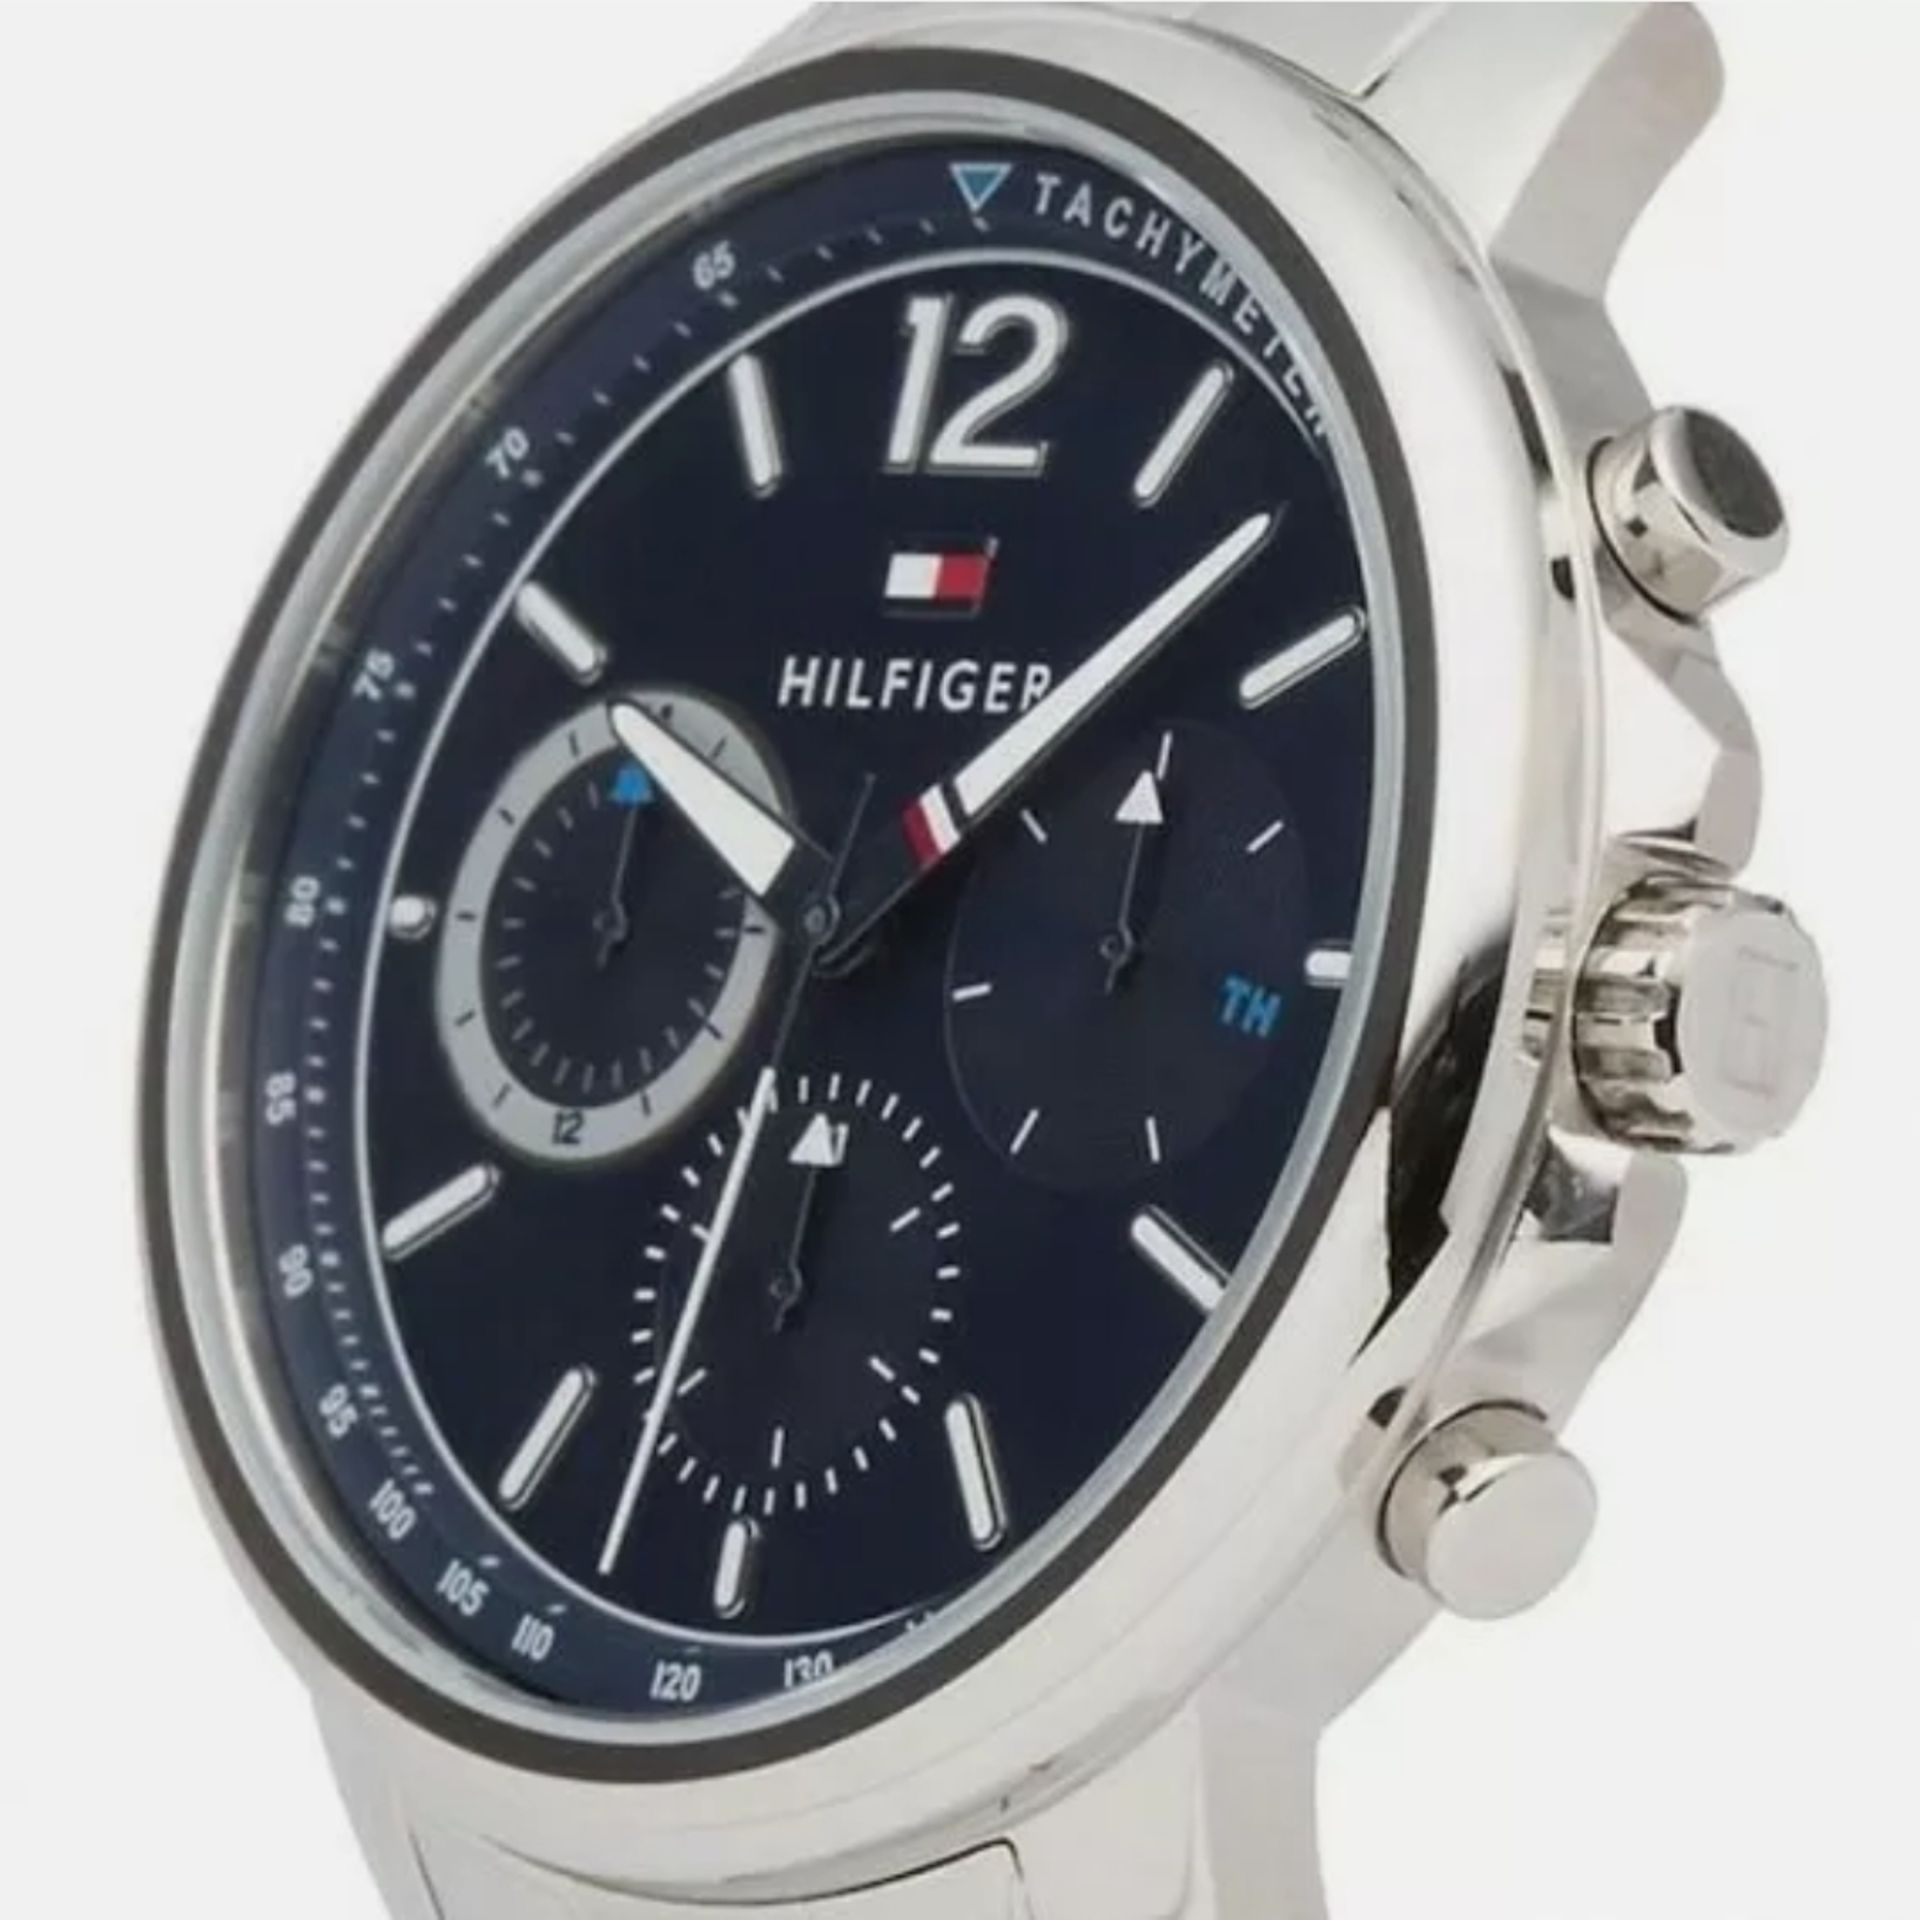 Tommy Hilfiger Men's Multi Dial Quartz Watch With Stainless Steel Strap 1791534  Tommy Hilfiger - Image 3 of 5